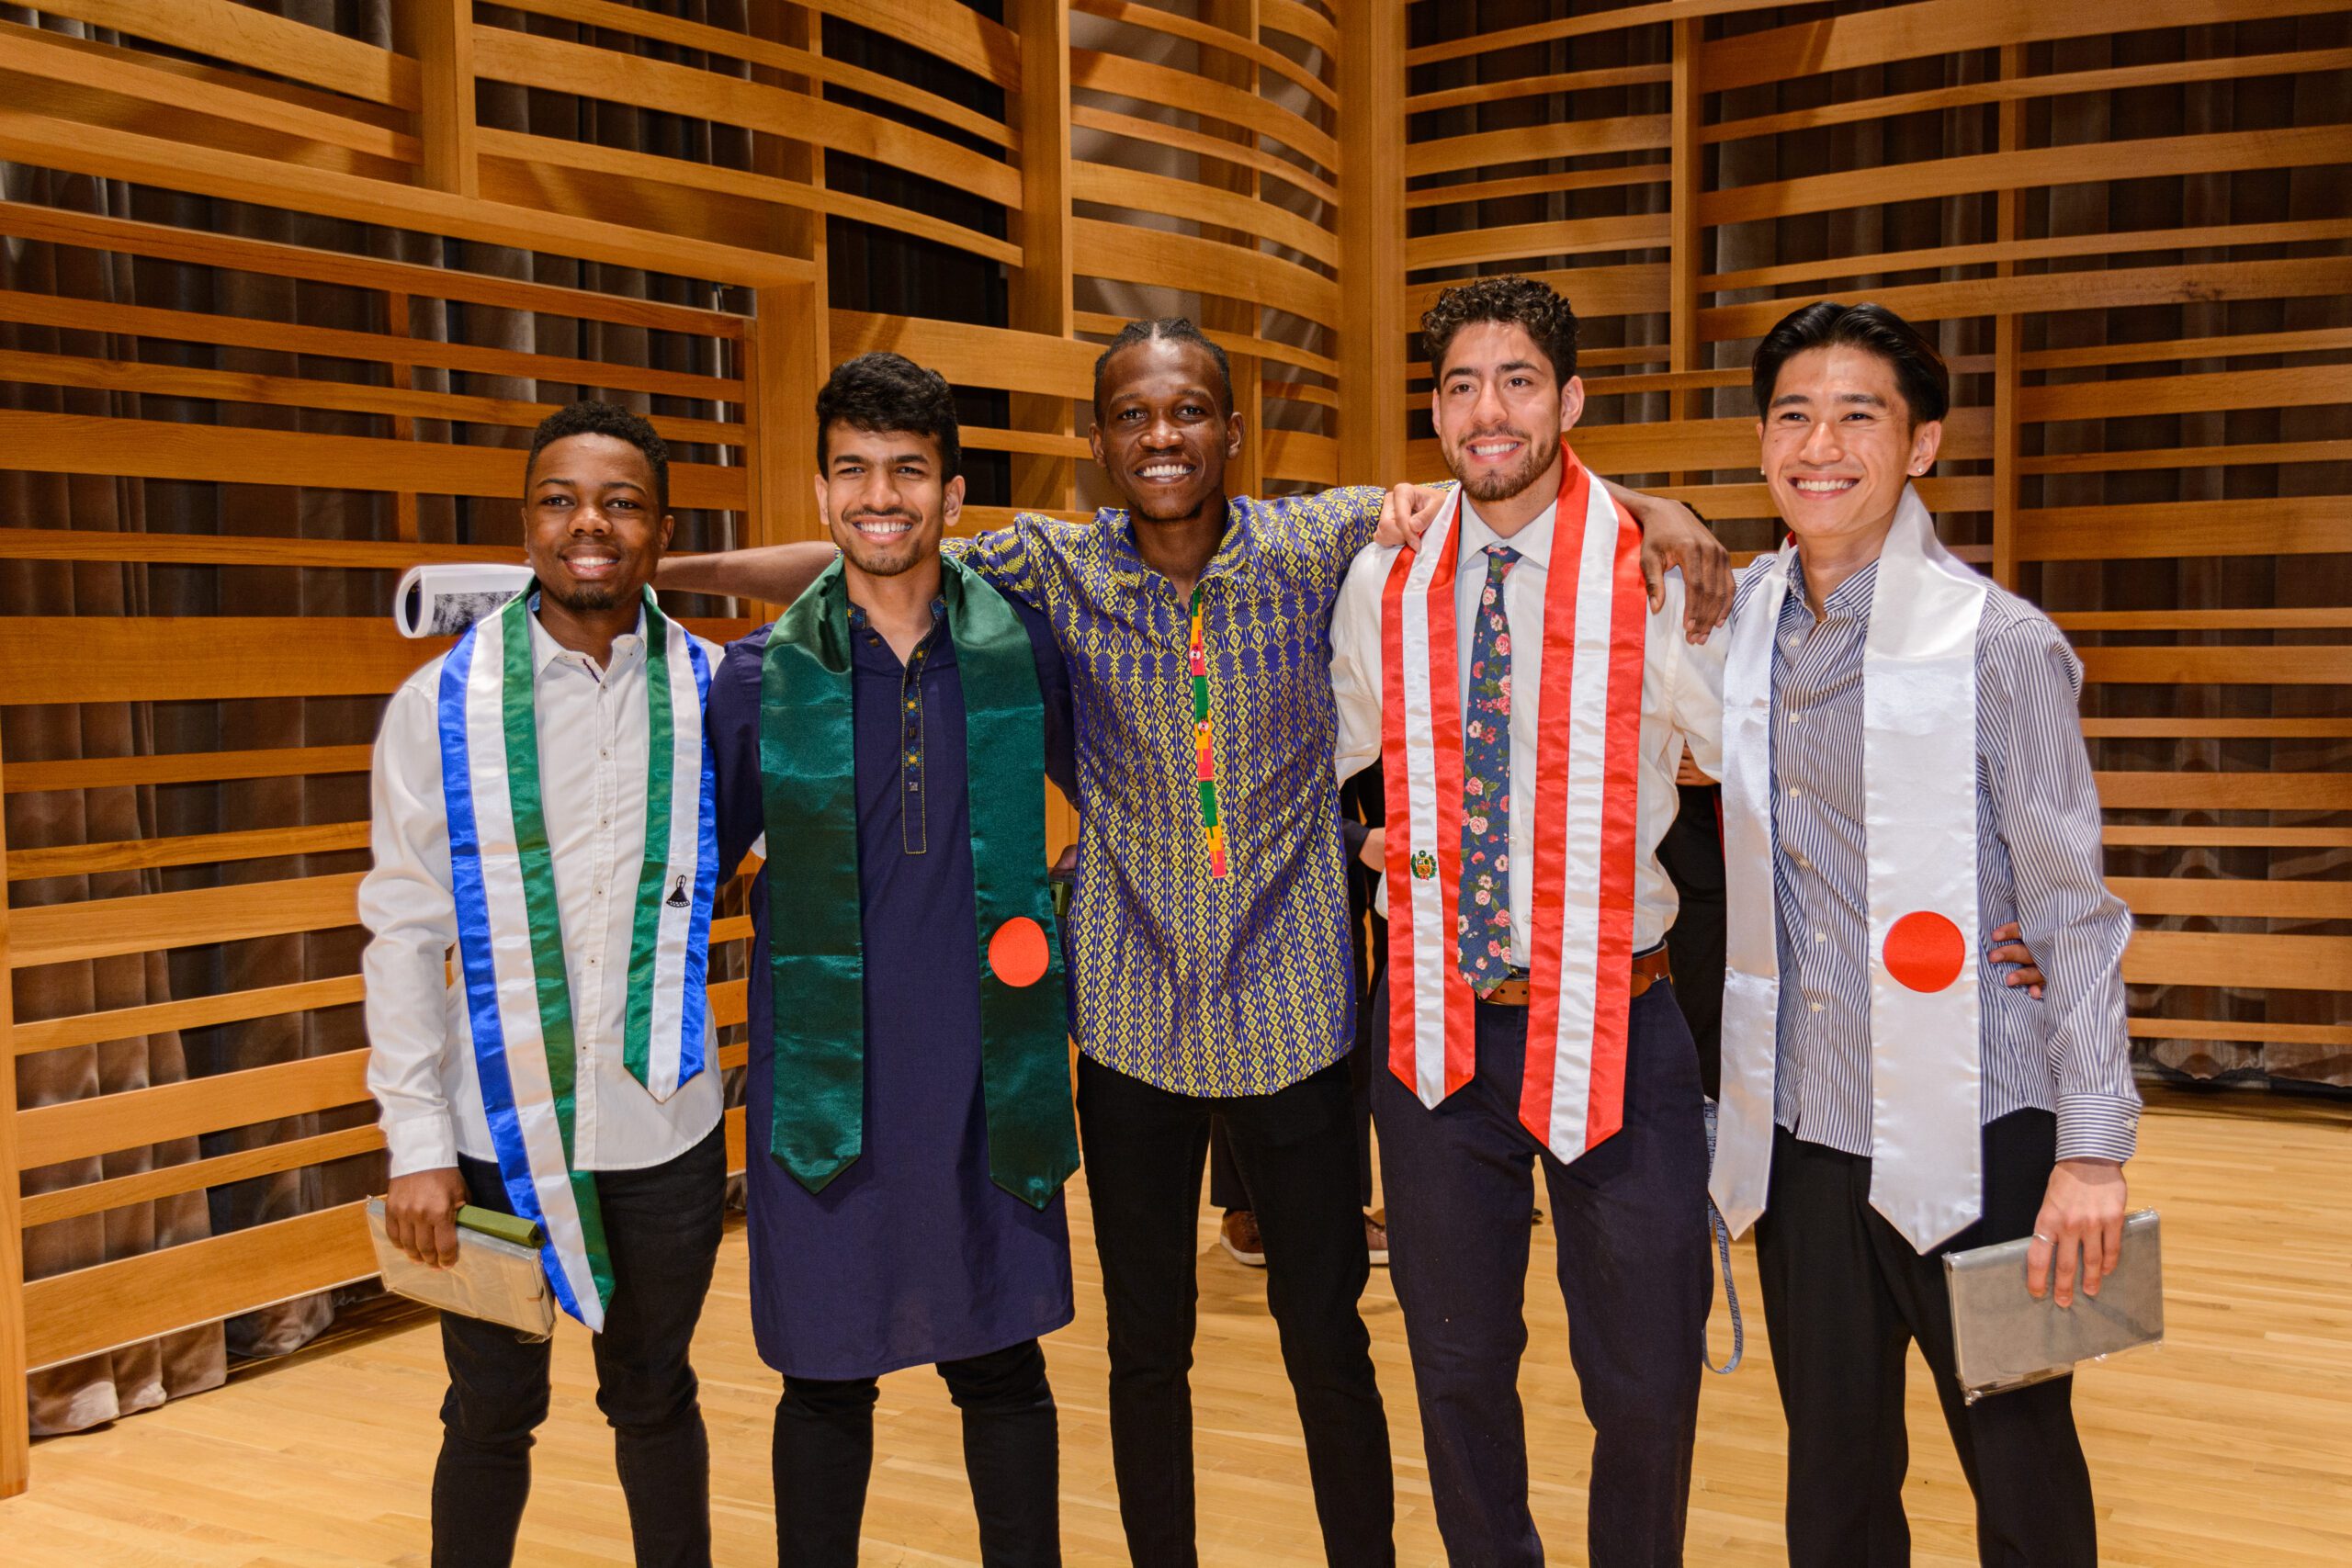 Students from different countries pose for a photograph during multicultural graduation.